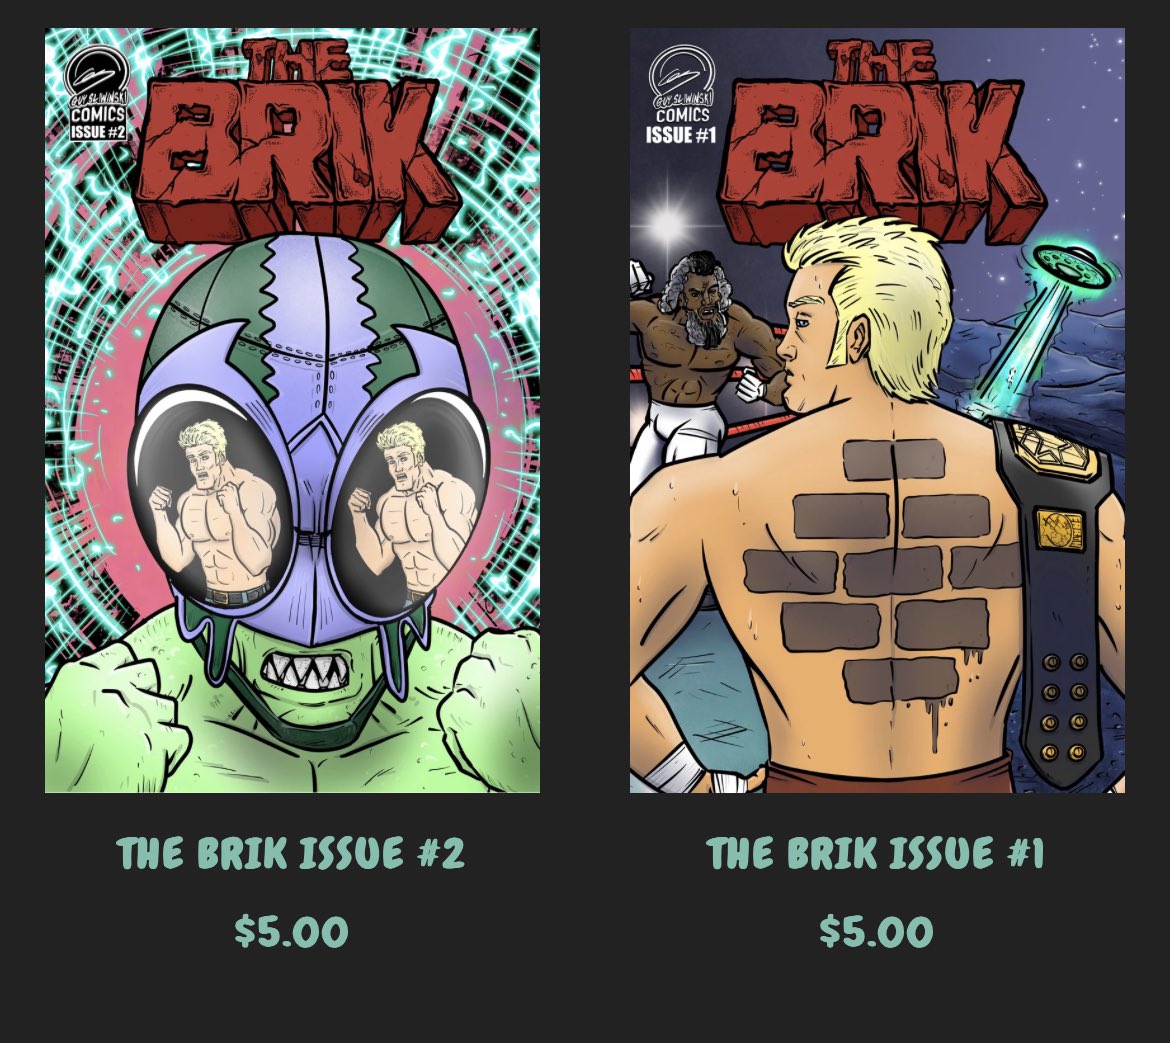 THE BRIK
Issue 2 just dropped! Ultra limited print run and the first appearance of a lot of characters. Collectors, do not miss out!!! Thebrik.bigcartel.com #thebrik #comics #ComicCon23 #sdcc #sdcc23 #indiecomics